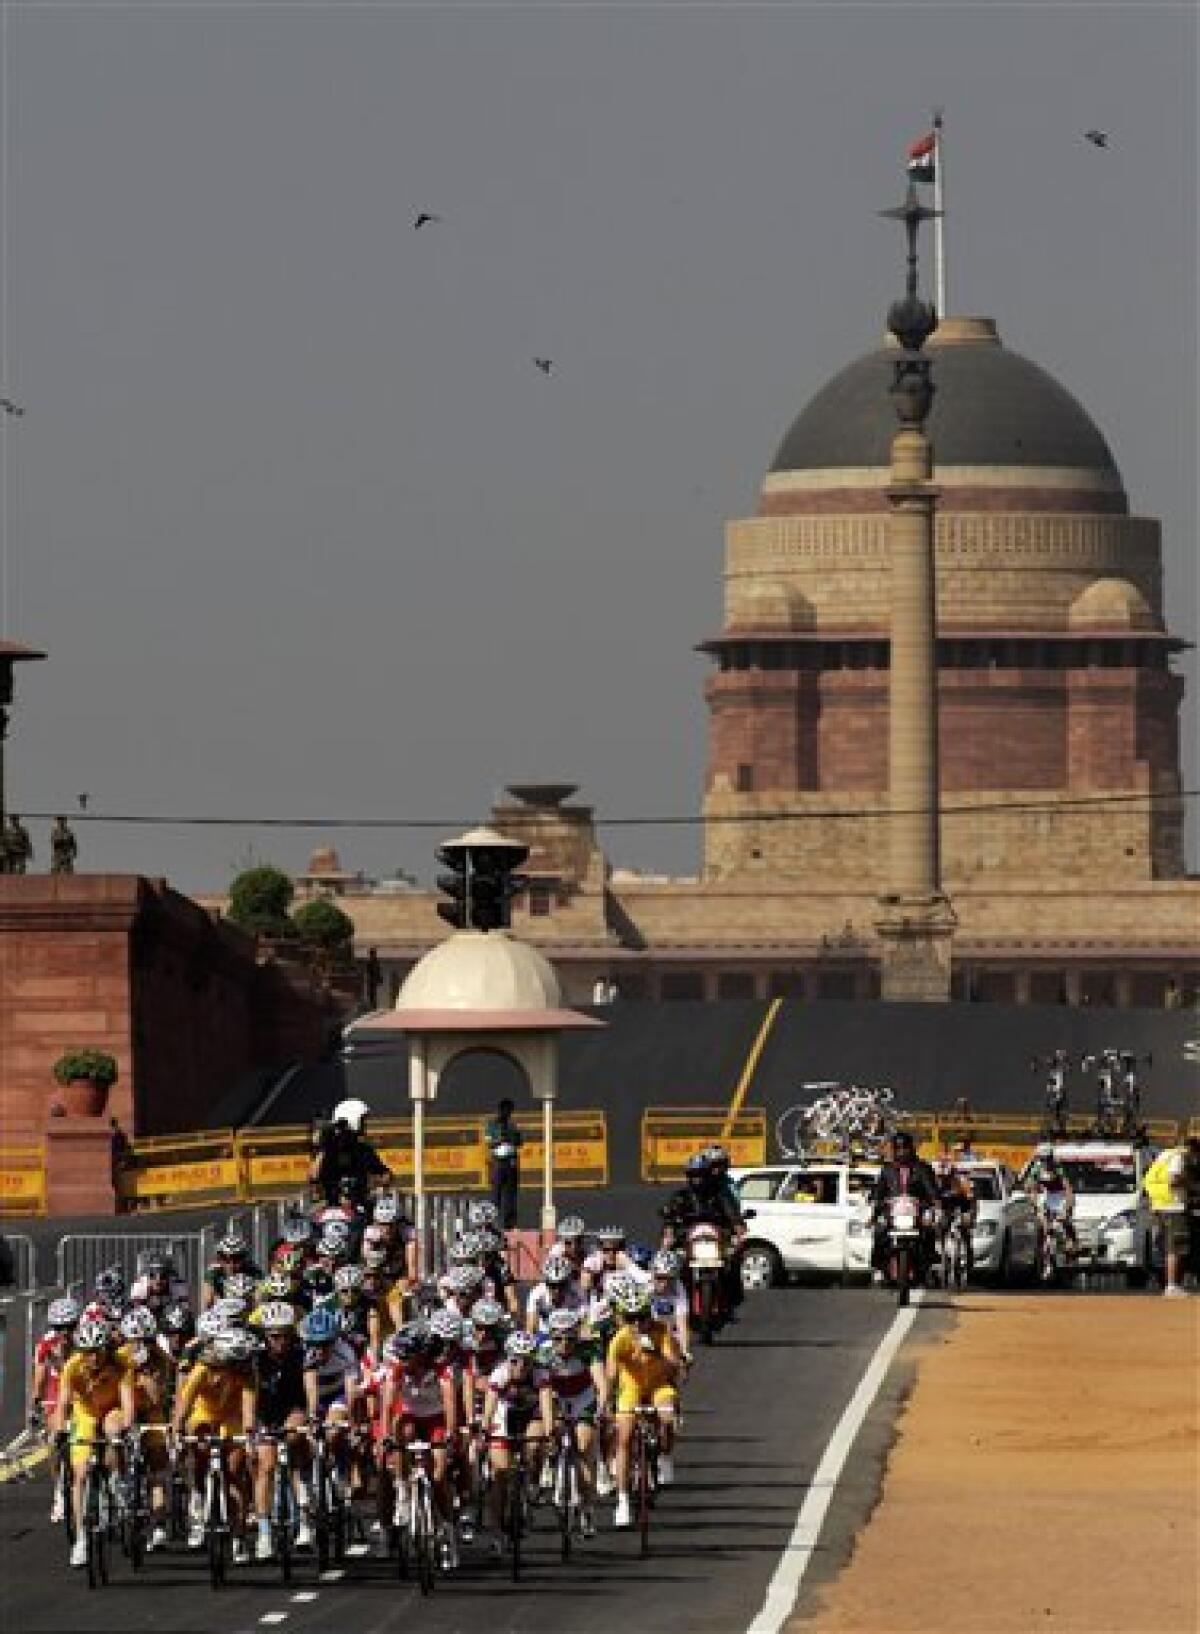 Participants ride past the Indian Presidential Palace in the women's 112km cycling road race during the Commonwealth Games in New Delhi, India, Sunday, Oct. 10, 2010. (AP Photo/Manish Swarup)